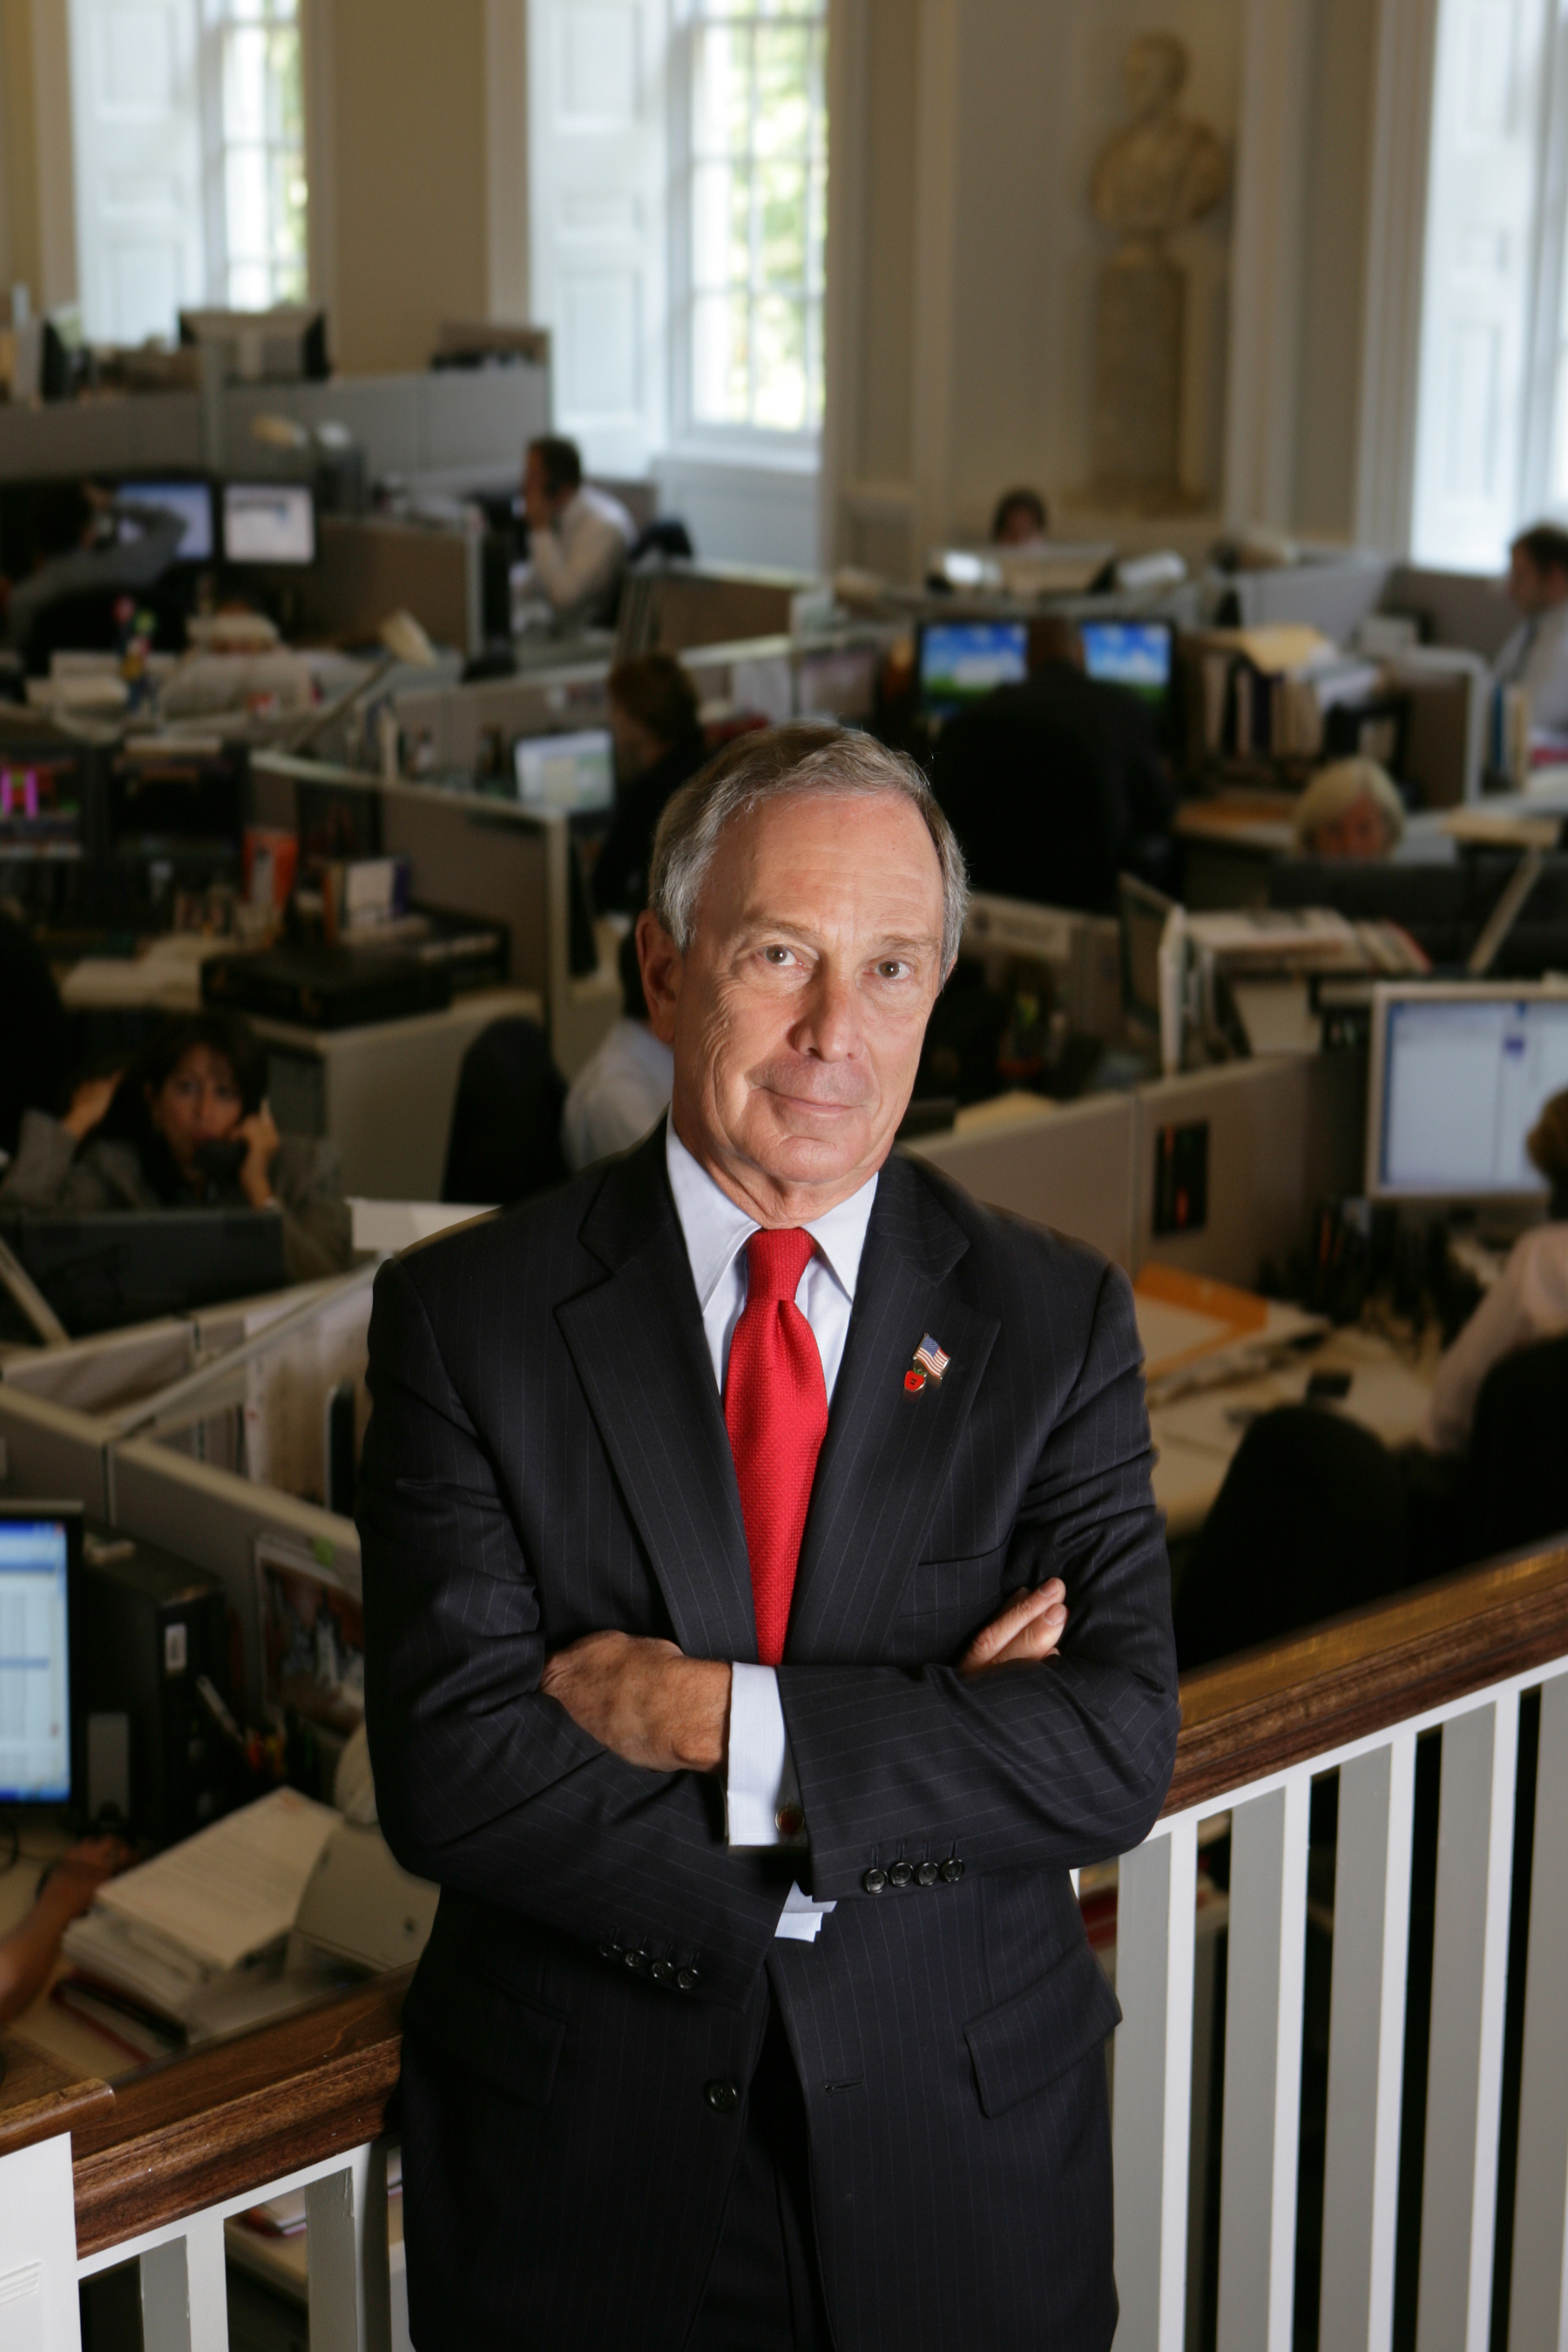 Bloomberg to appear on U.S. presidential ballot in Texas